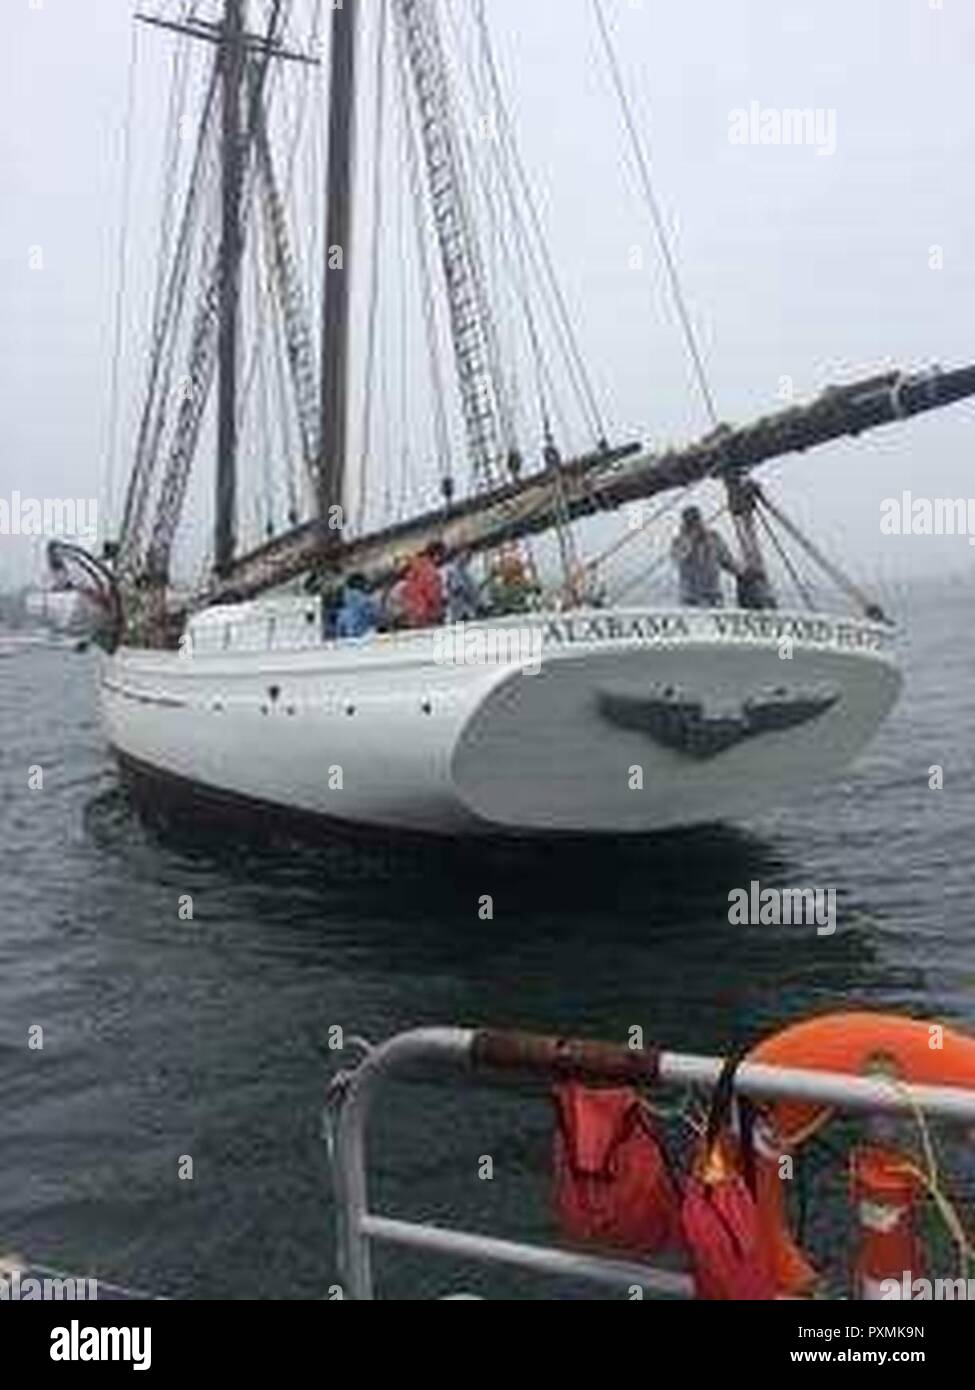 A Coast Guard Station New London boatcrew safely transferred 17 passengers from a grounded Schooner near the mouth of the Mystic River, Connecticut, Sunday evening. The Station boatcrew arrived on scene and safely transferred the 17 passengers from the 126-foot Schooner, Alabama, to Noank shipyard in Groton, Conn. Stock Photo